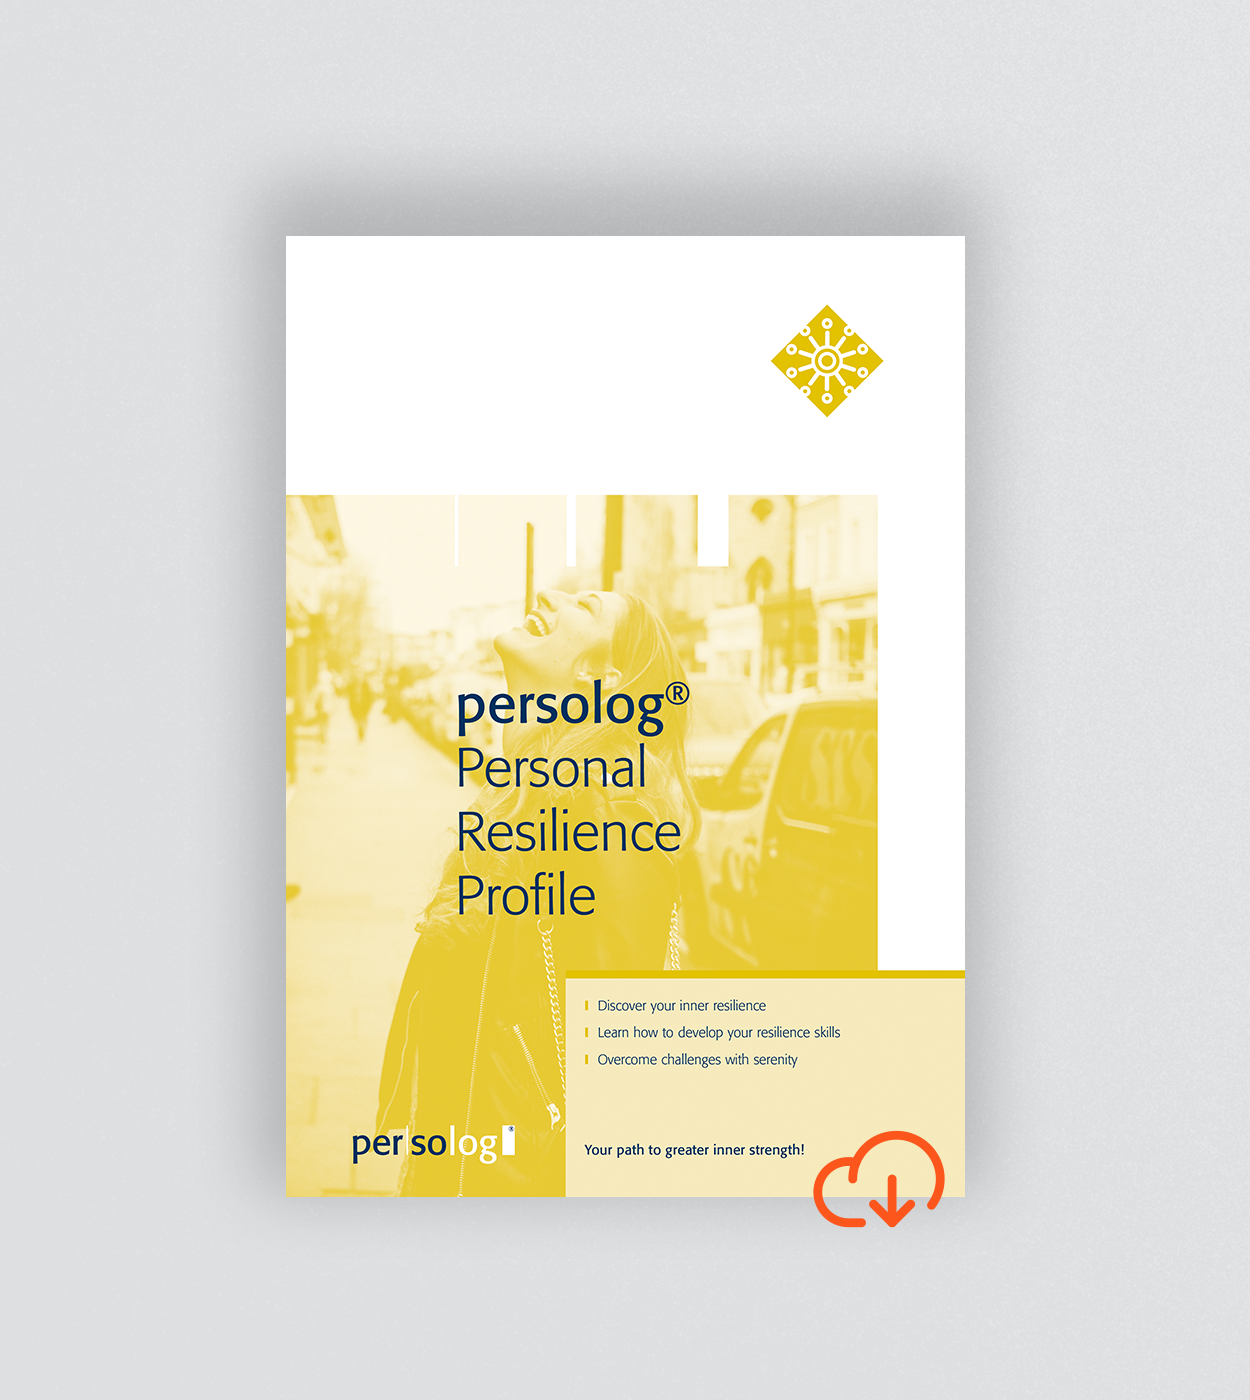 persolog® Personal Resilience Profile online